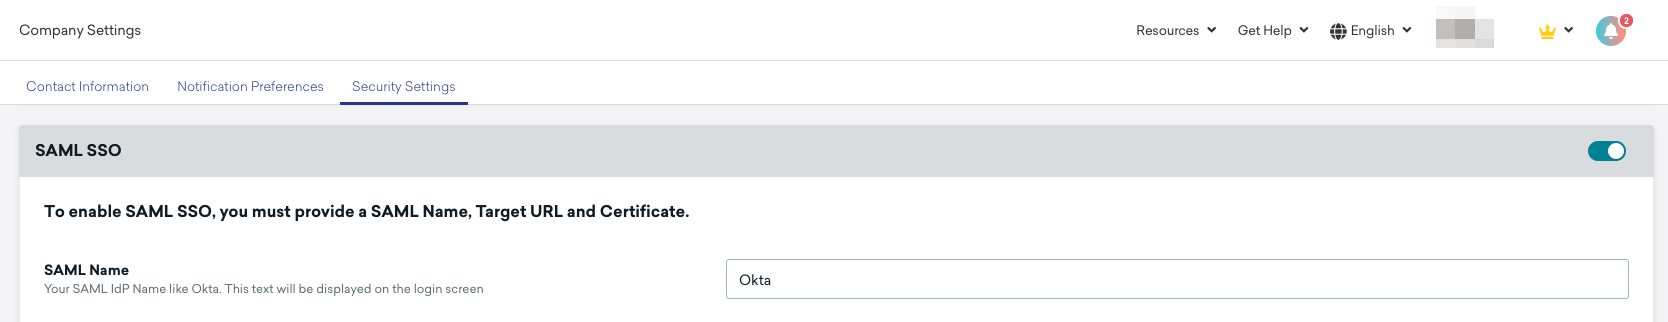 Okta SAML SSO enabled on the Security Settings page.